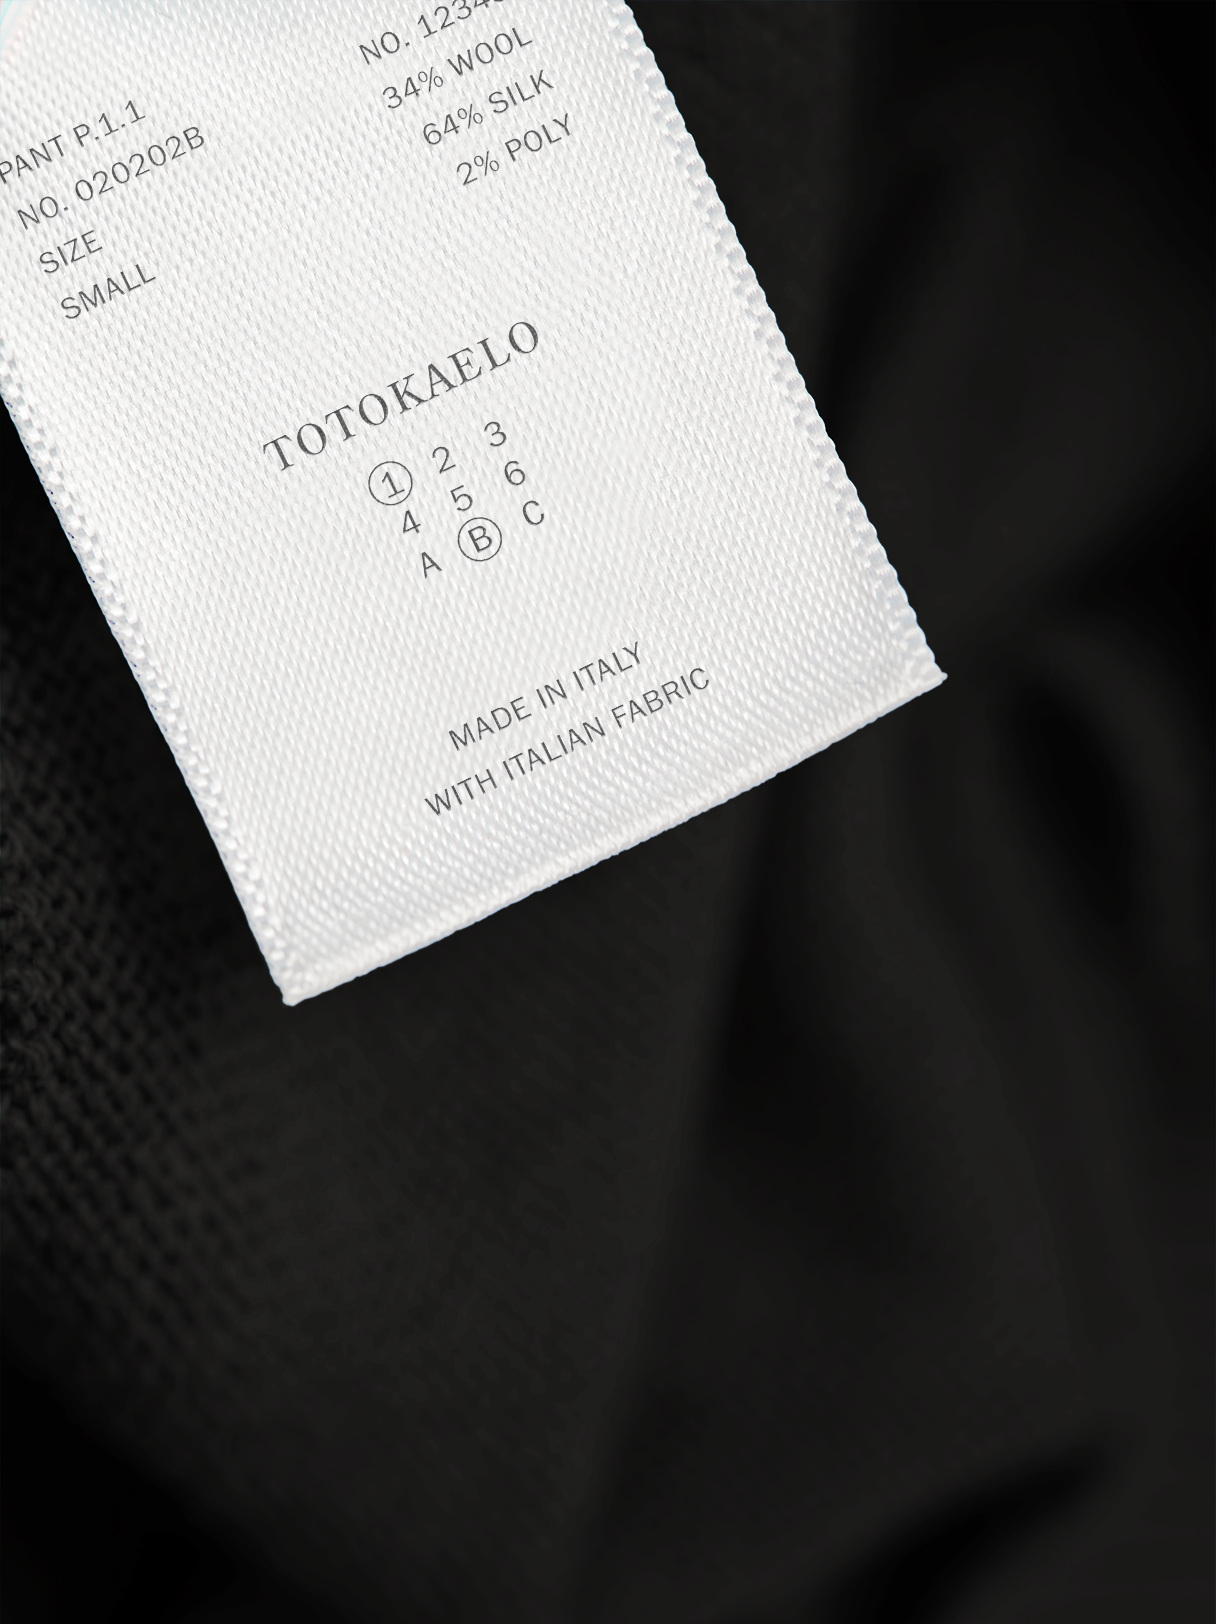 TK-care-label-cropped-6